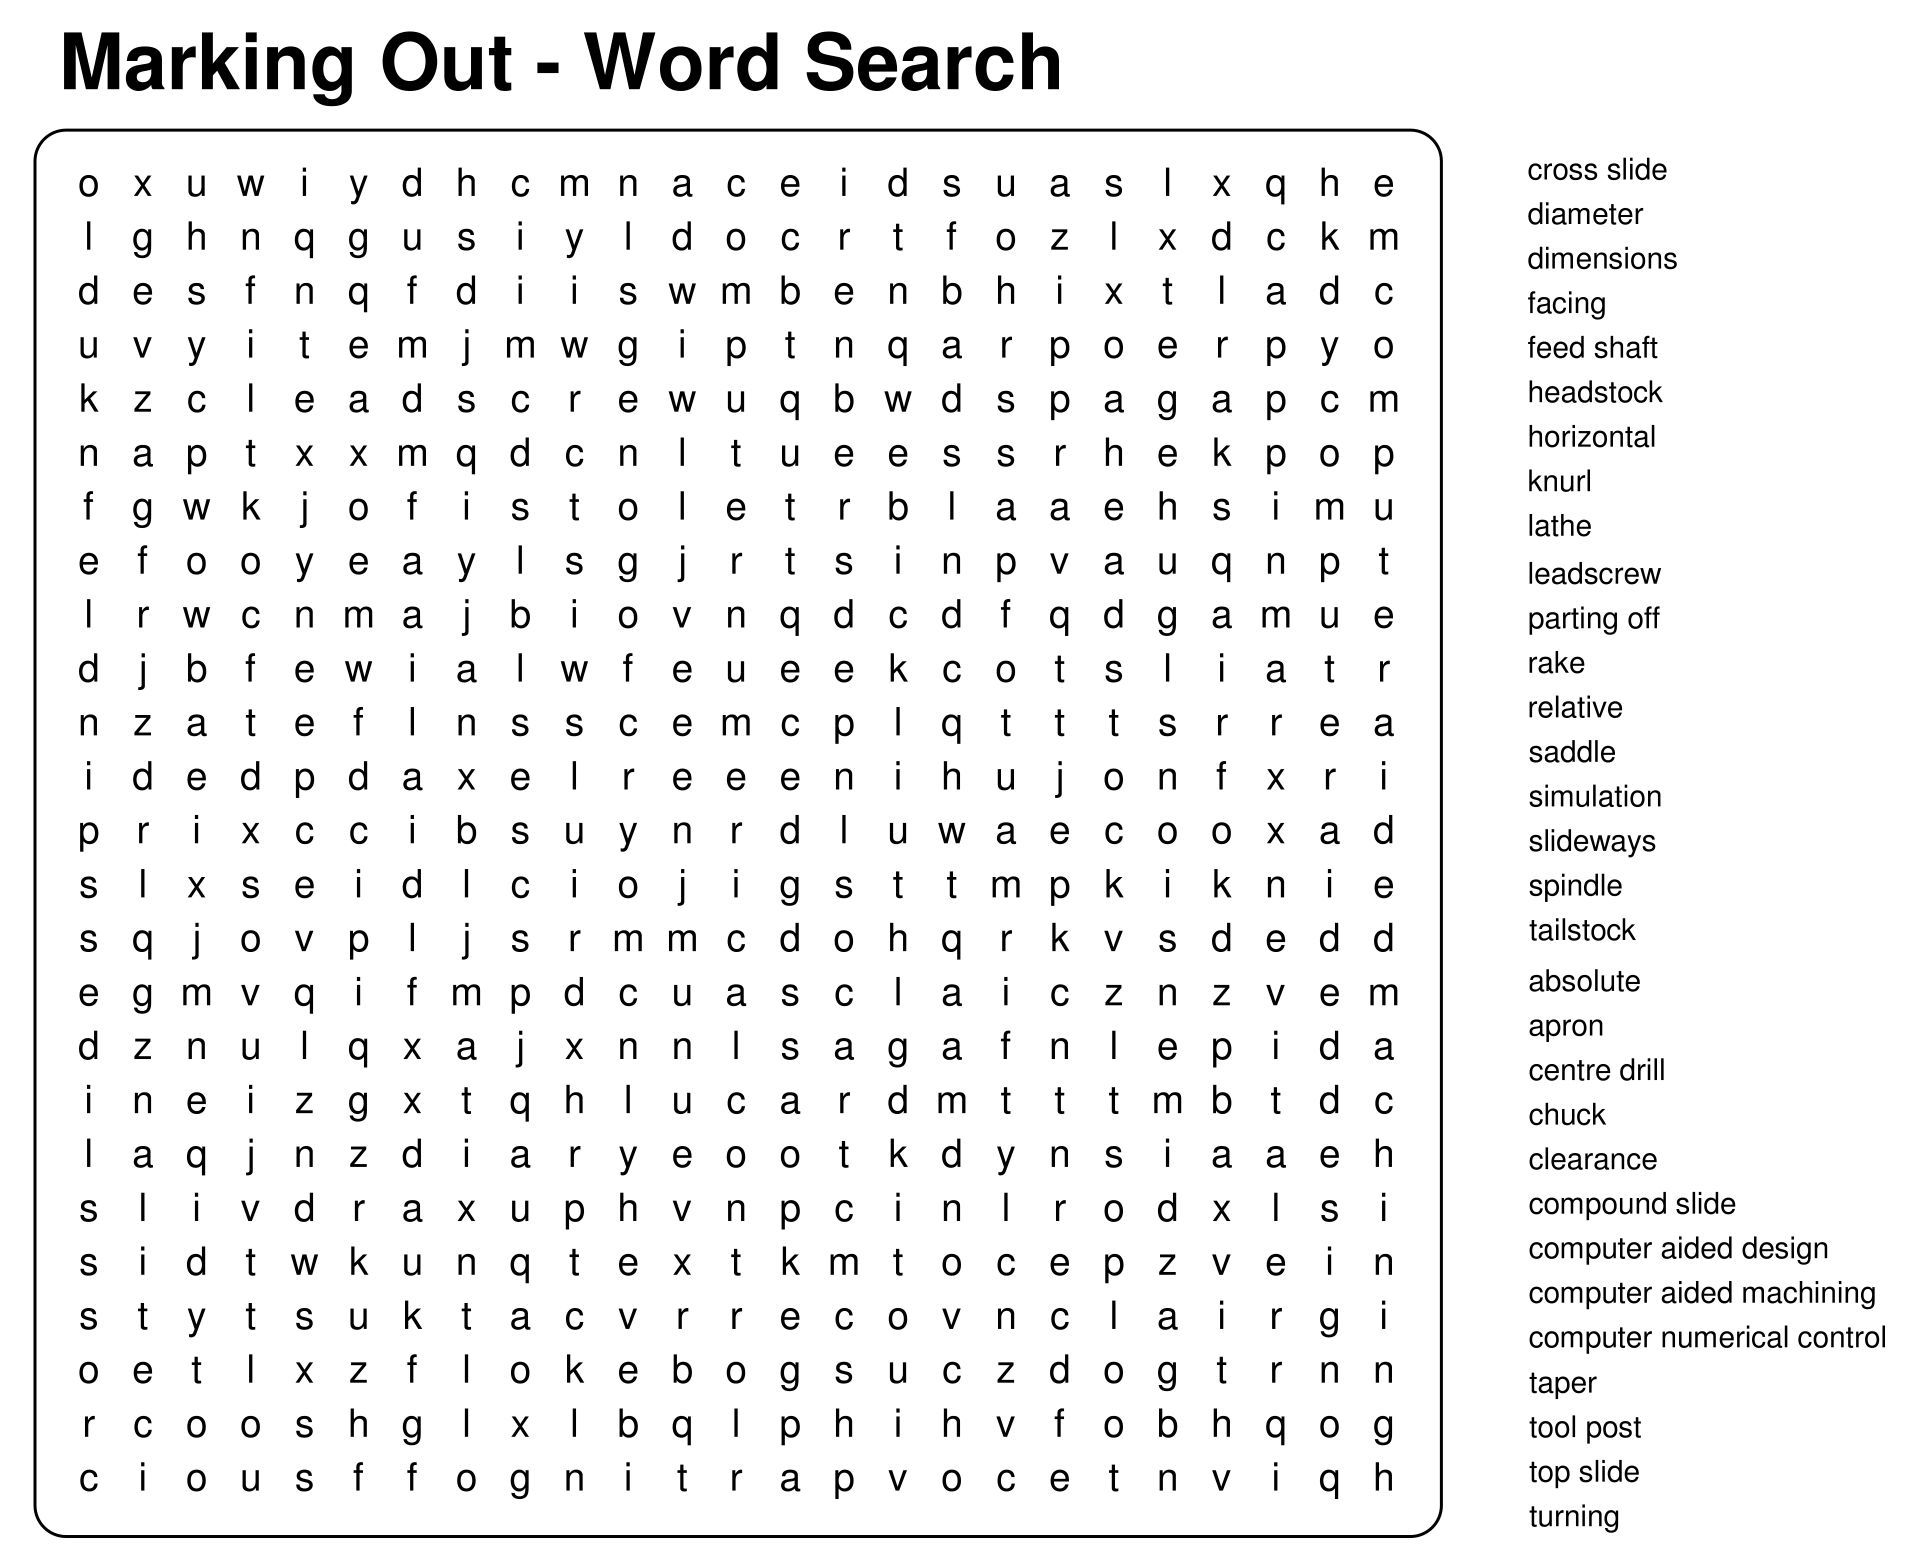 Adult Word Search Puzzles Free Printable_25471